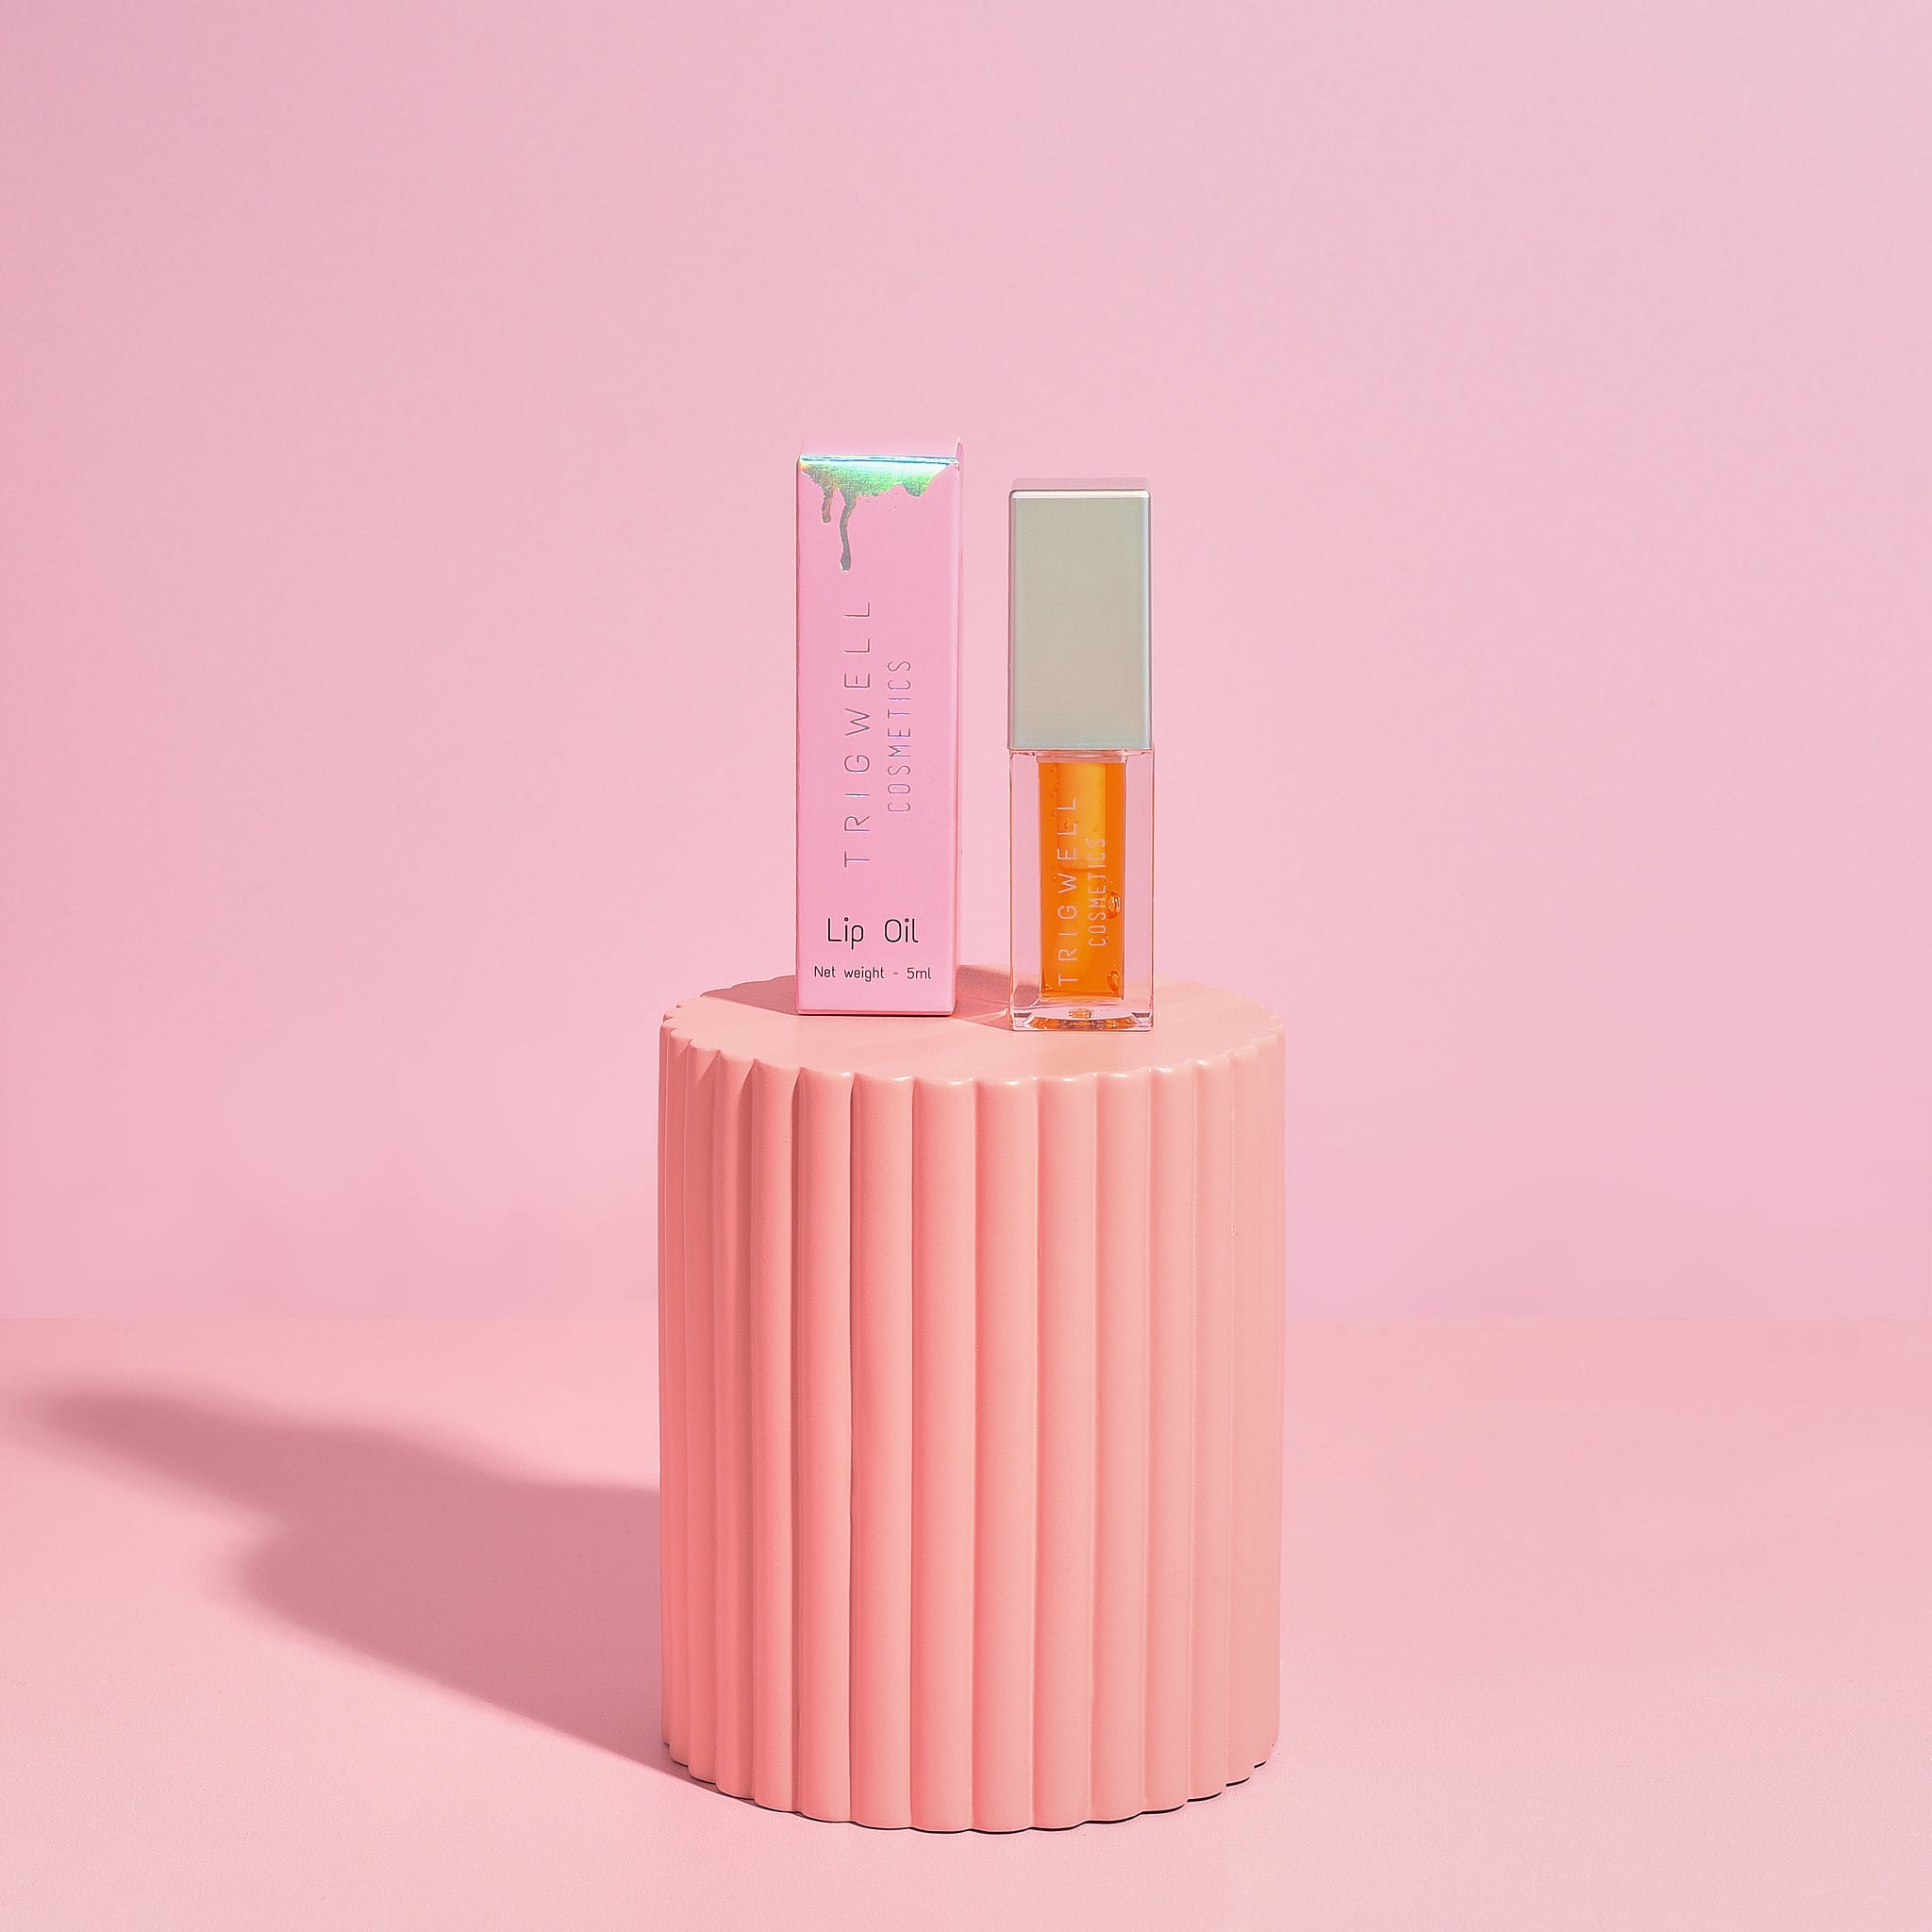 Image of Mango hydrating lip oil and its packaging